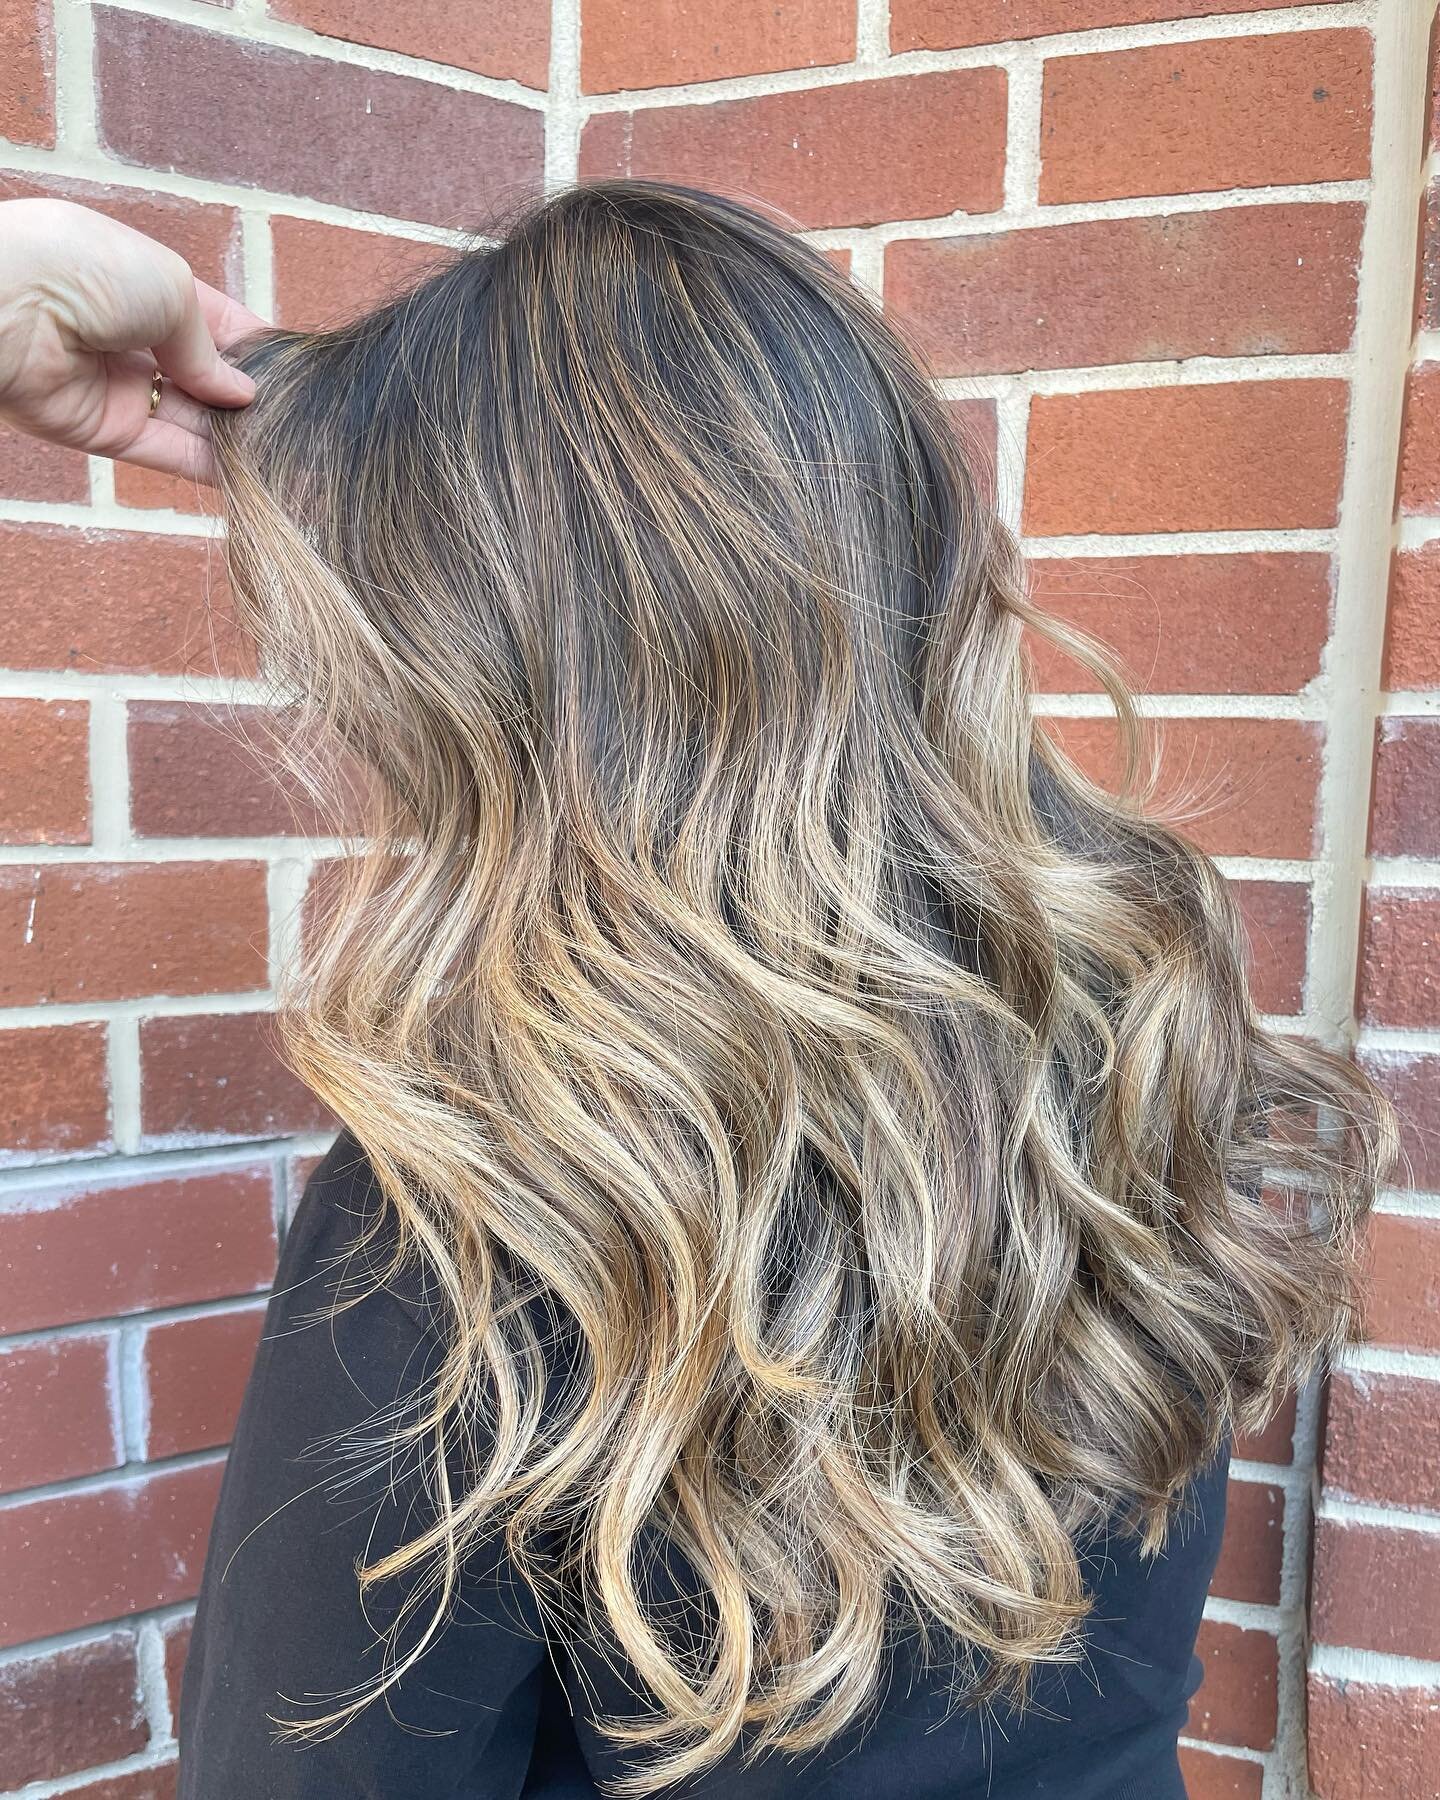 I did a complete overhaul on a new client last week. She walked in with 4in of dark outgrowth and previously lightened heavy highlights. It had been a while since she last got her hair done. Our goal was a blend of light and dark. I started with feat